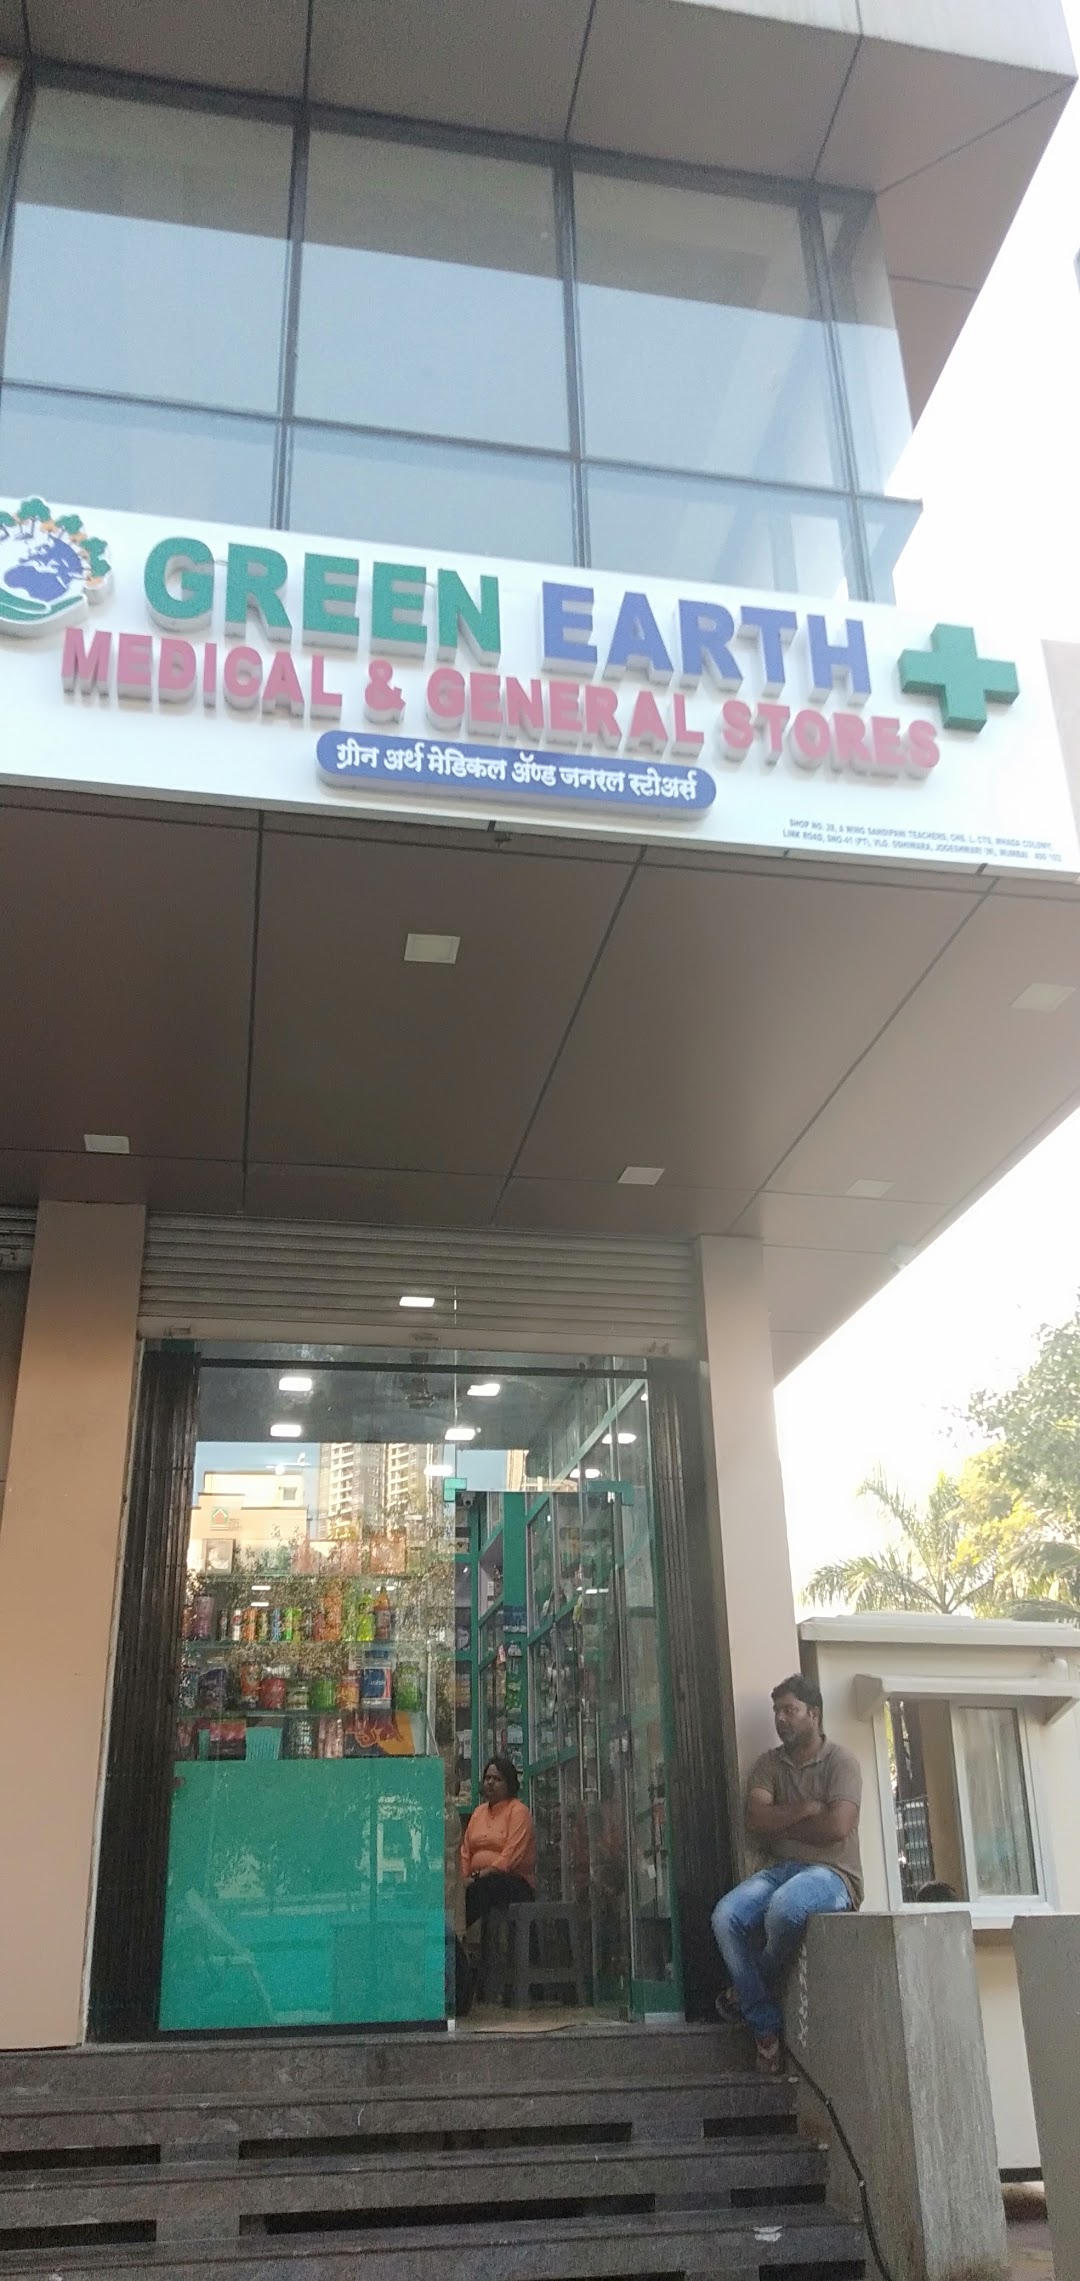 Greenearth Medical and general Stores